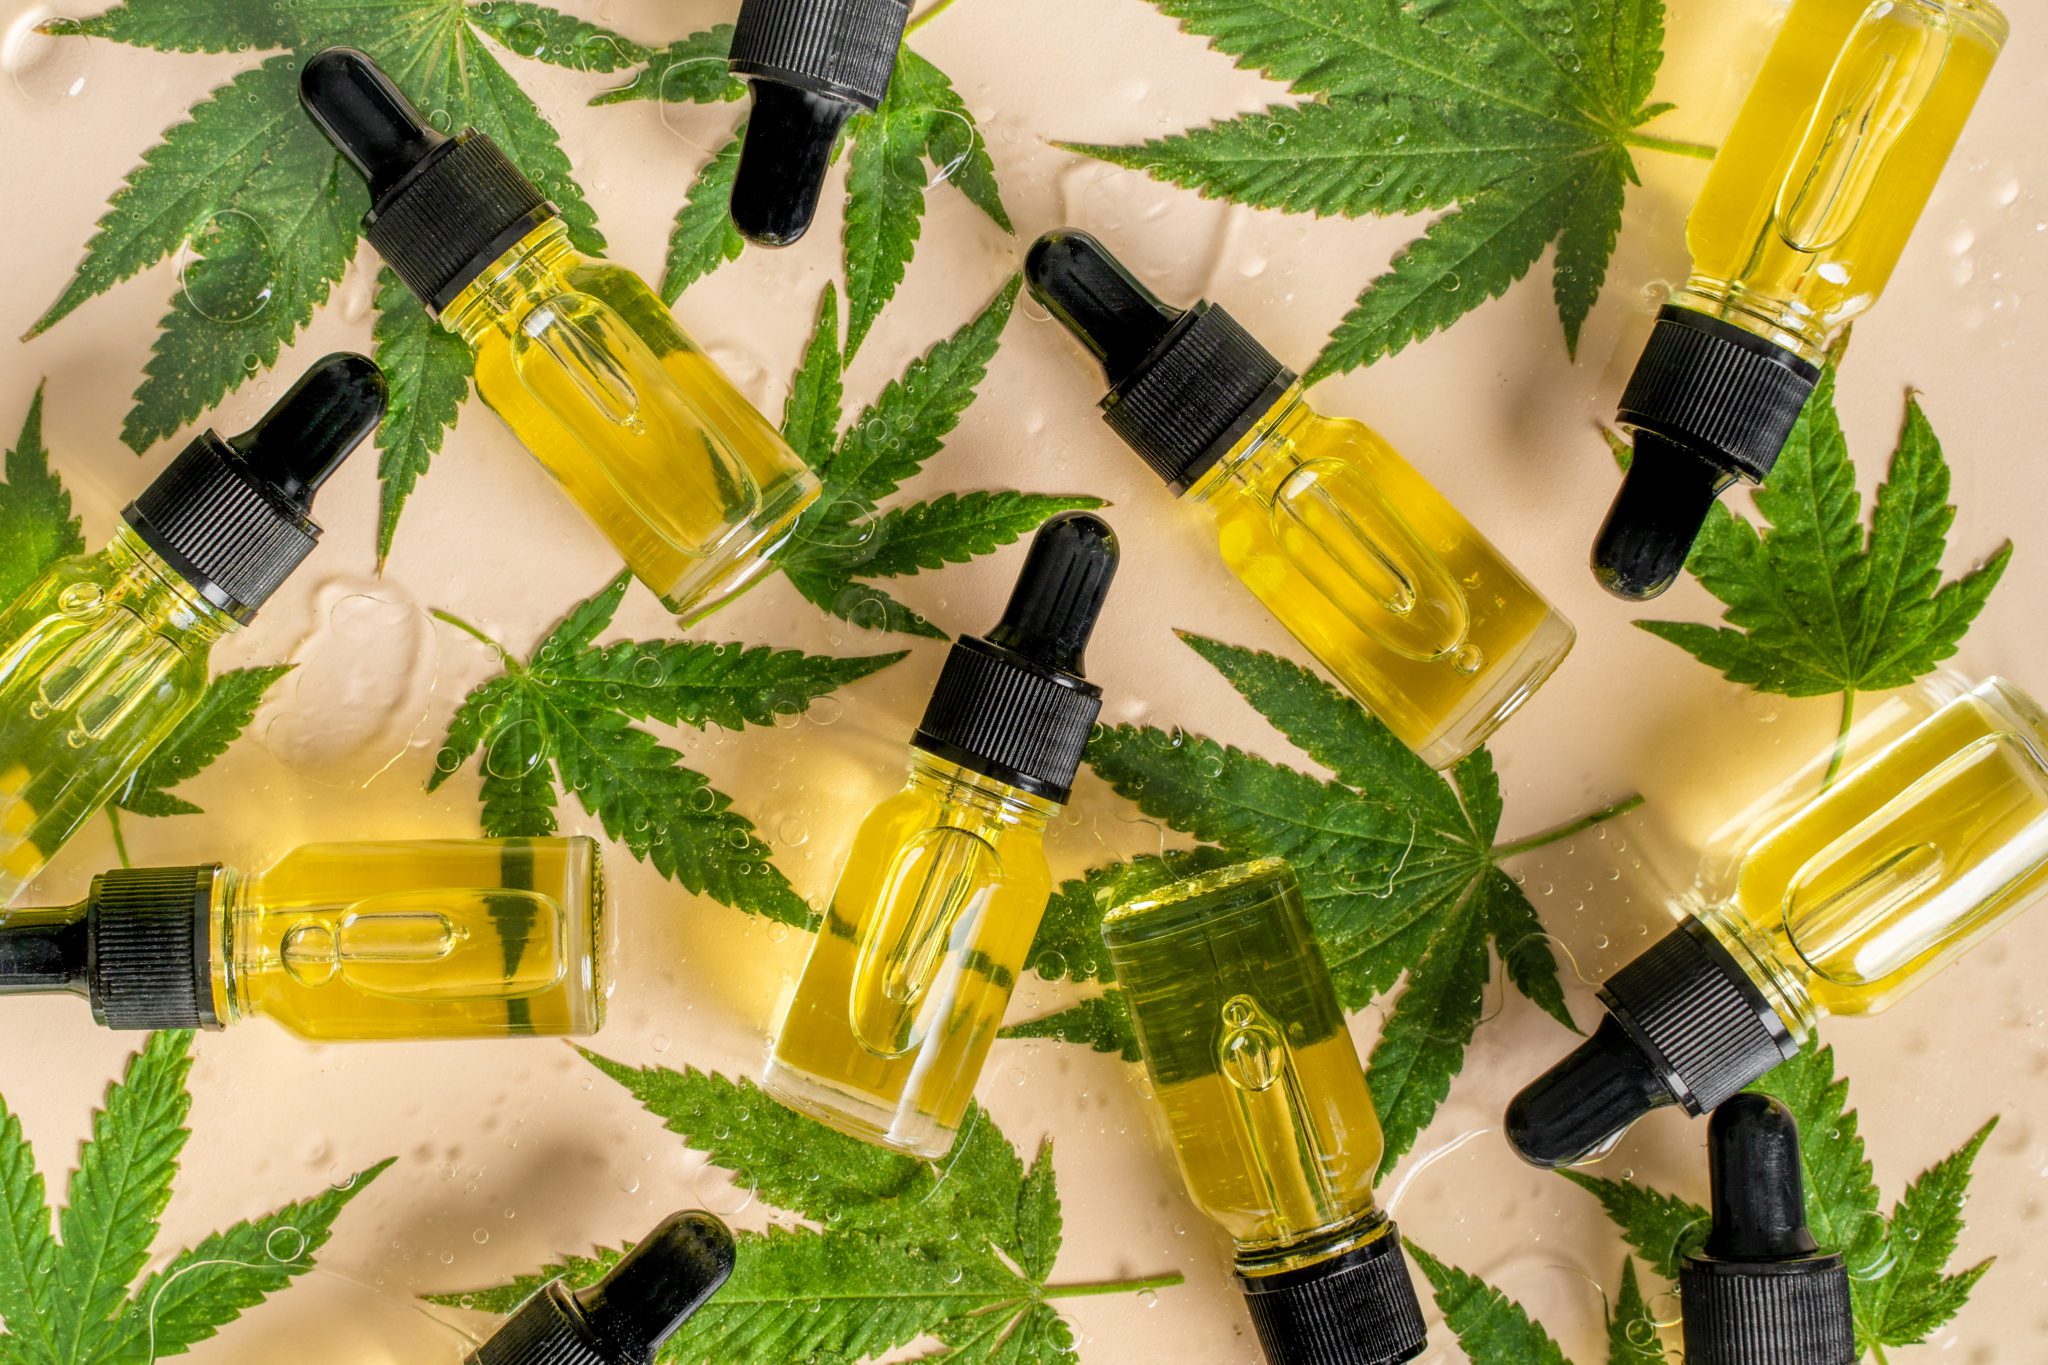 Broad-Spectrum vs. Full-Spectrum CBD: What’s the Difference?